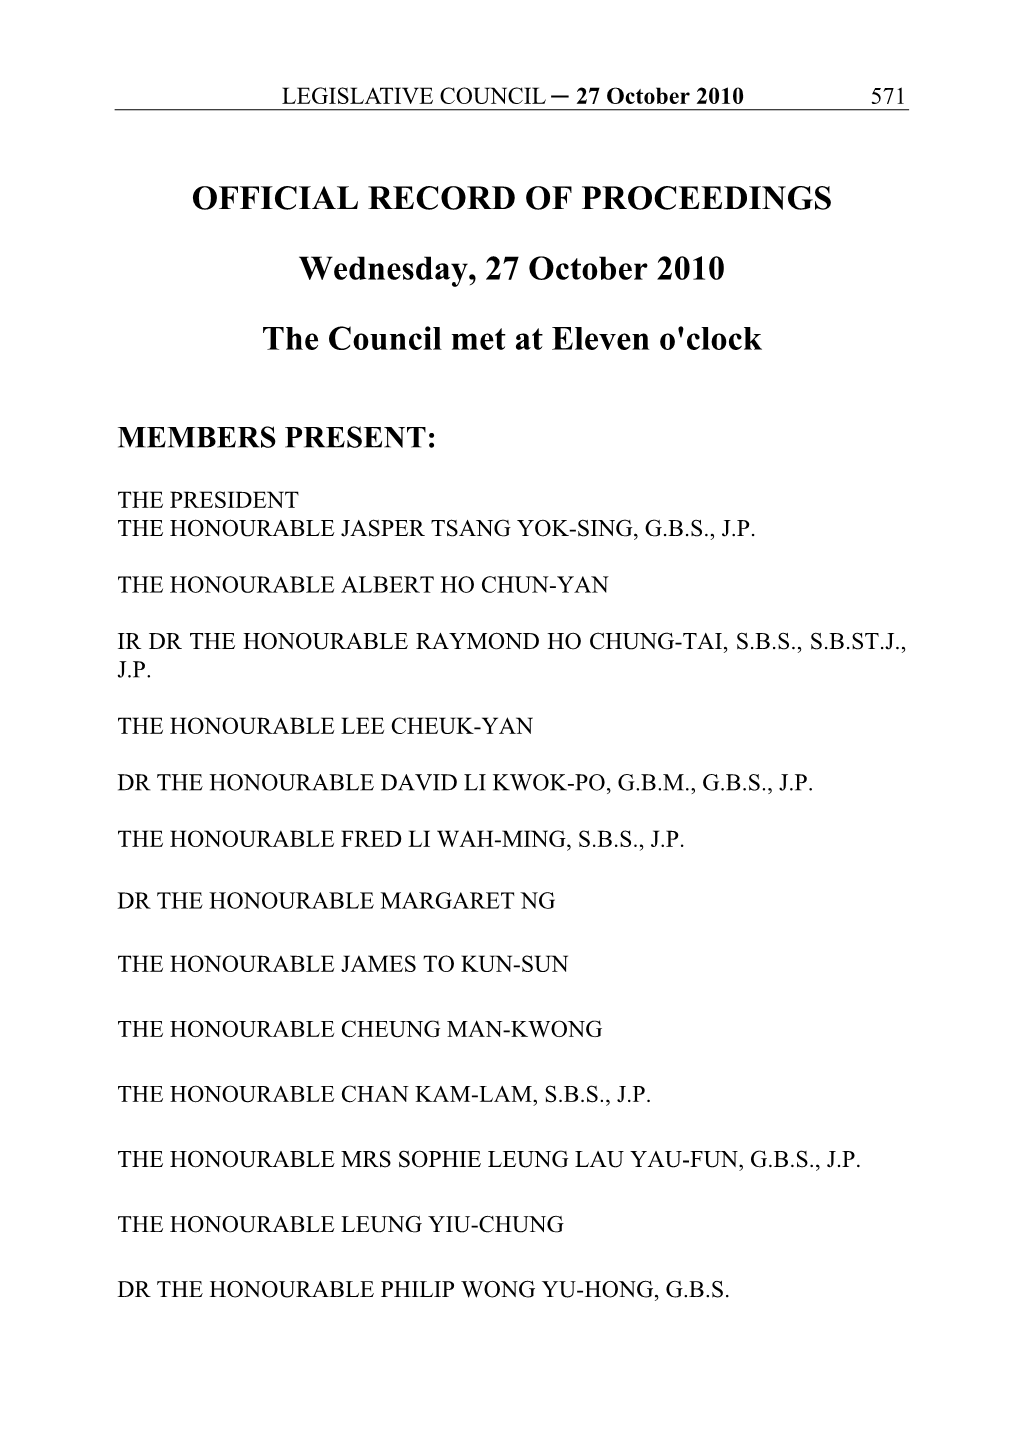 OFFICIAL RECORD of PROCEEDINGS Wednesday, 27 October 2010 the Council Met at Eleven O'clock